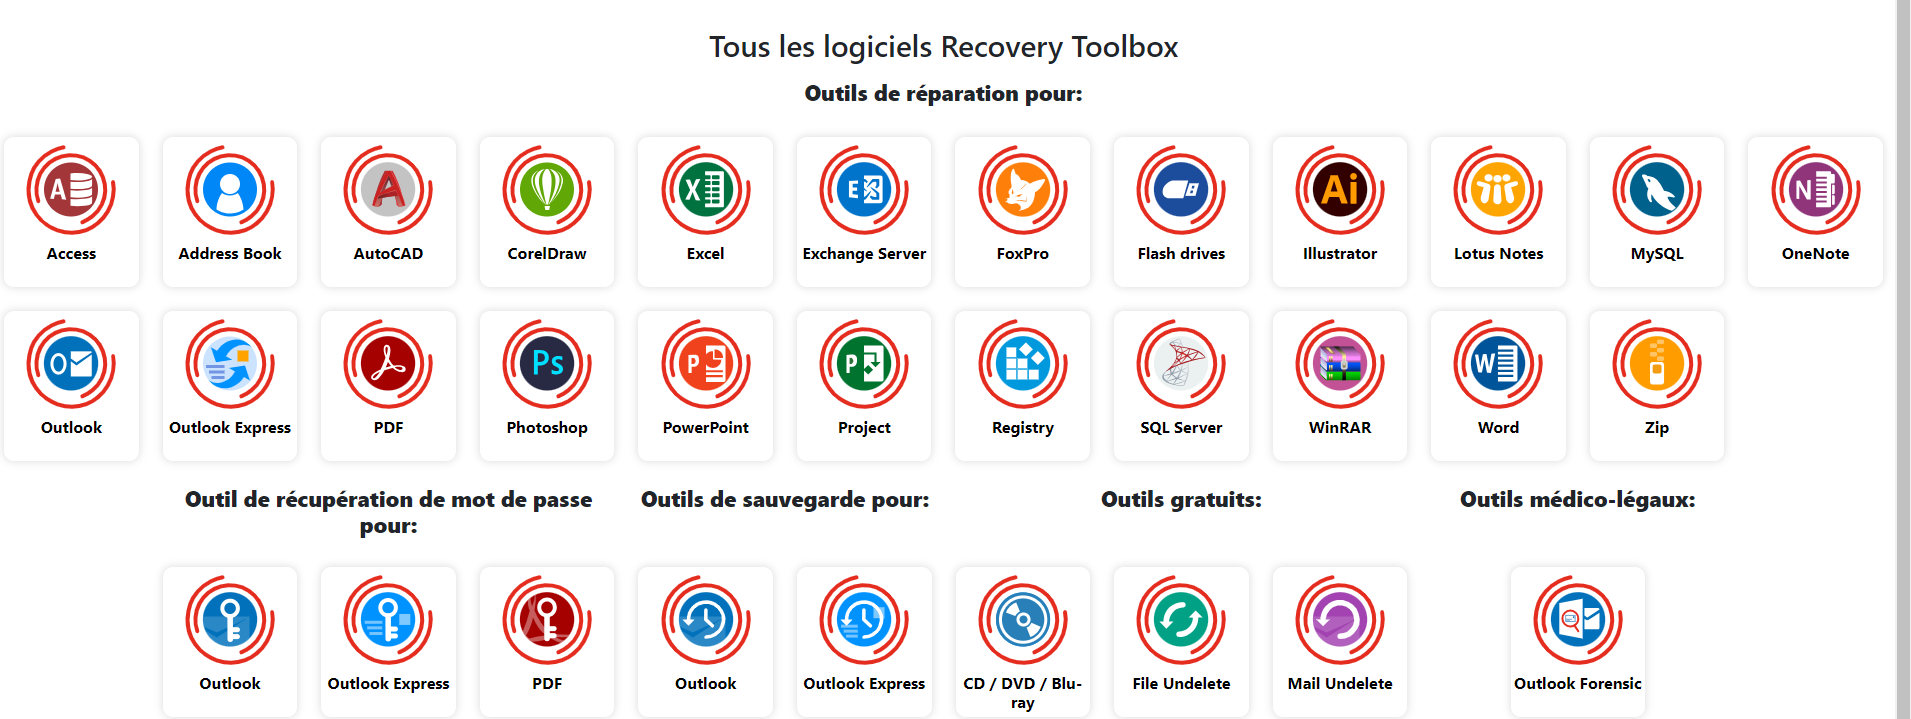 recovery-toolbox.png